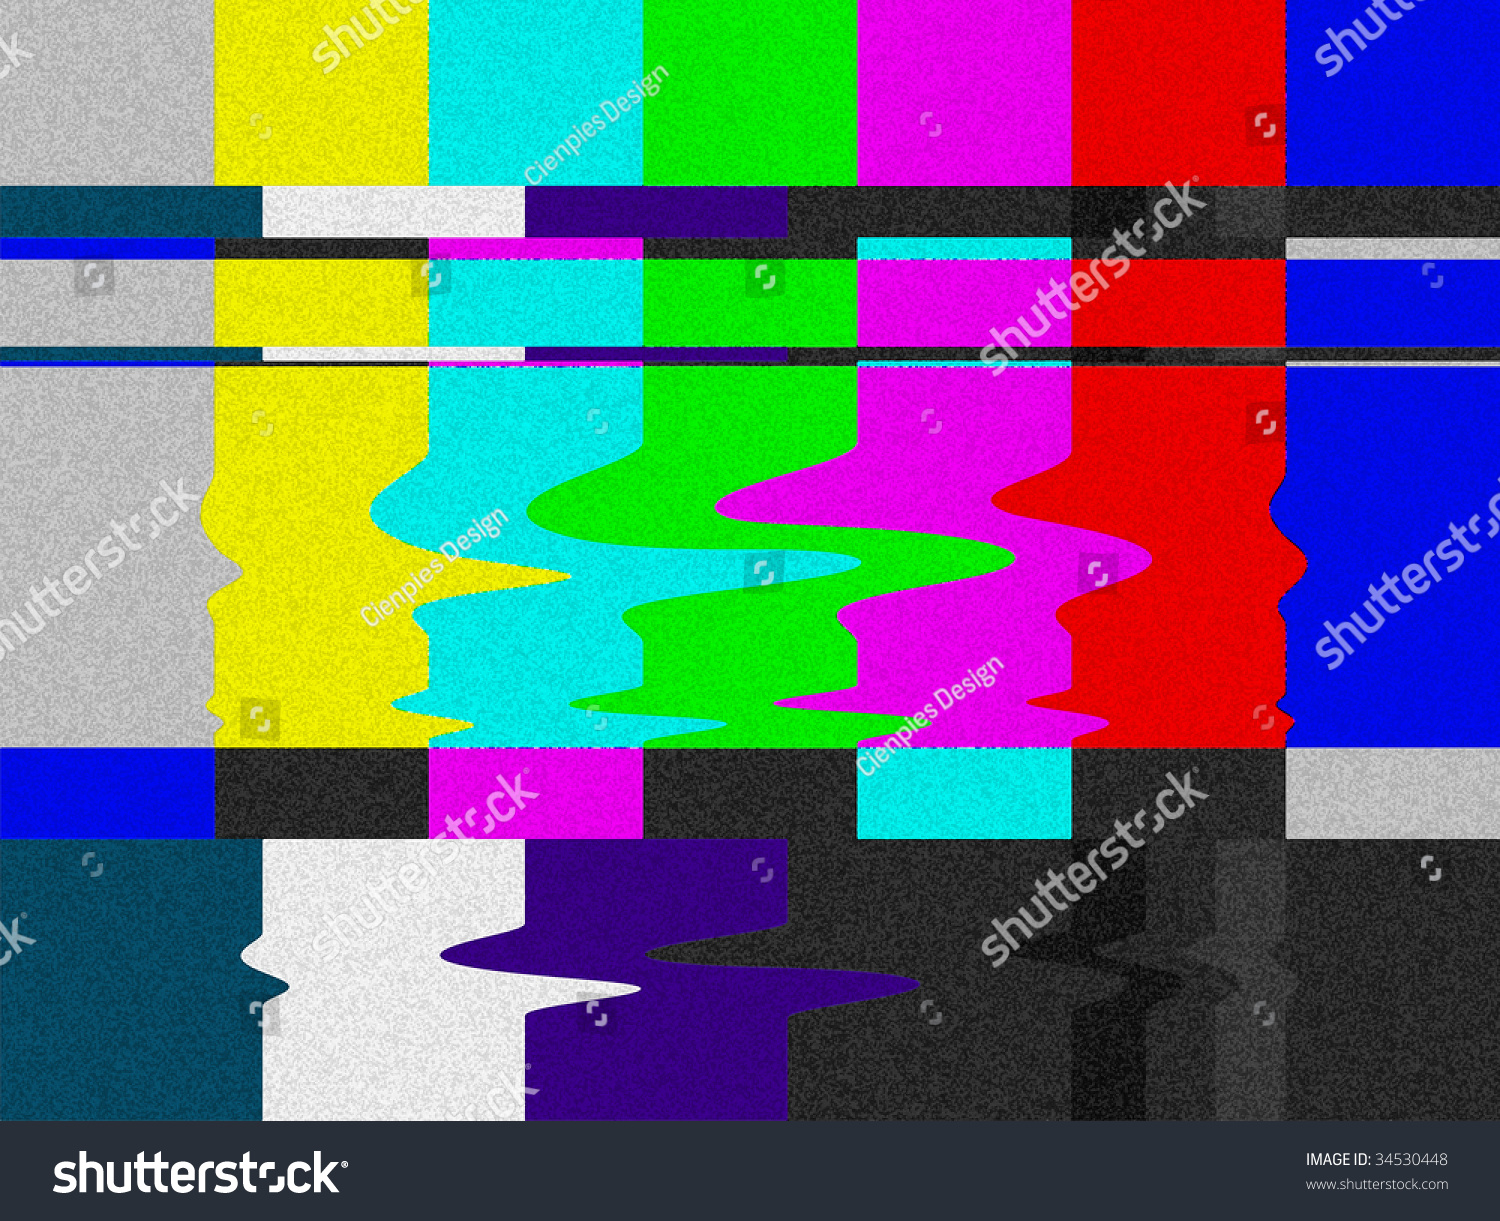 Distorted Television Bars Signal. Error On The Test Signal. Stock Photo ...